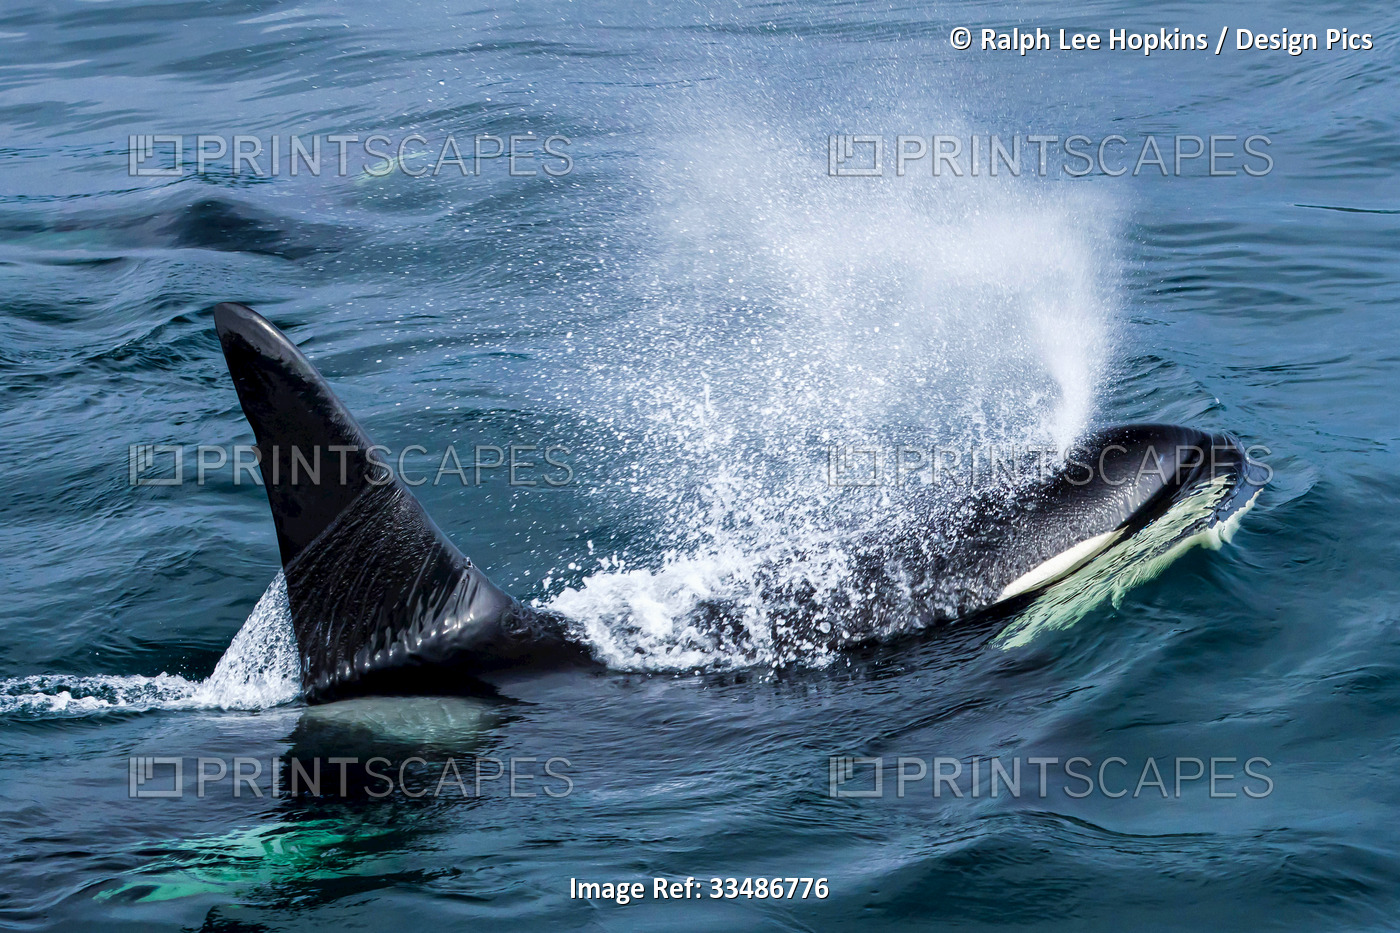 View from above of a killer whale spraying through its blowhole.